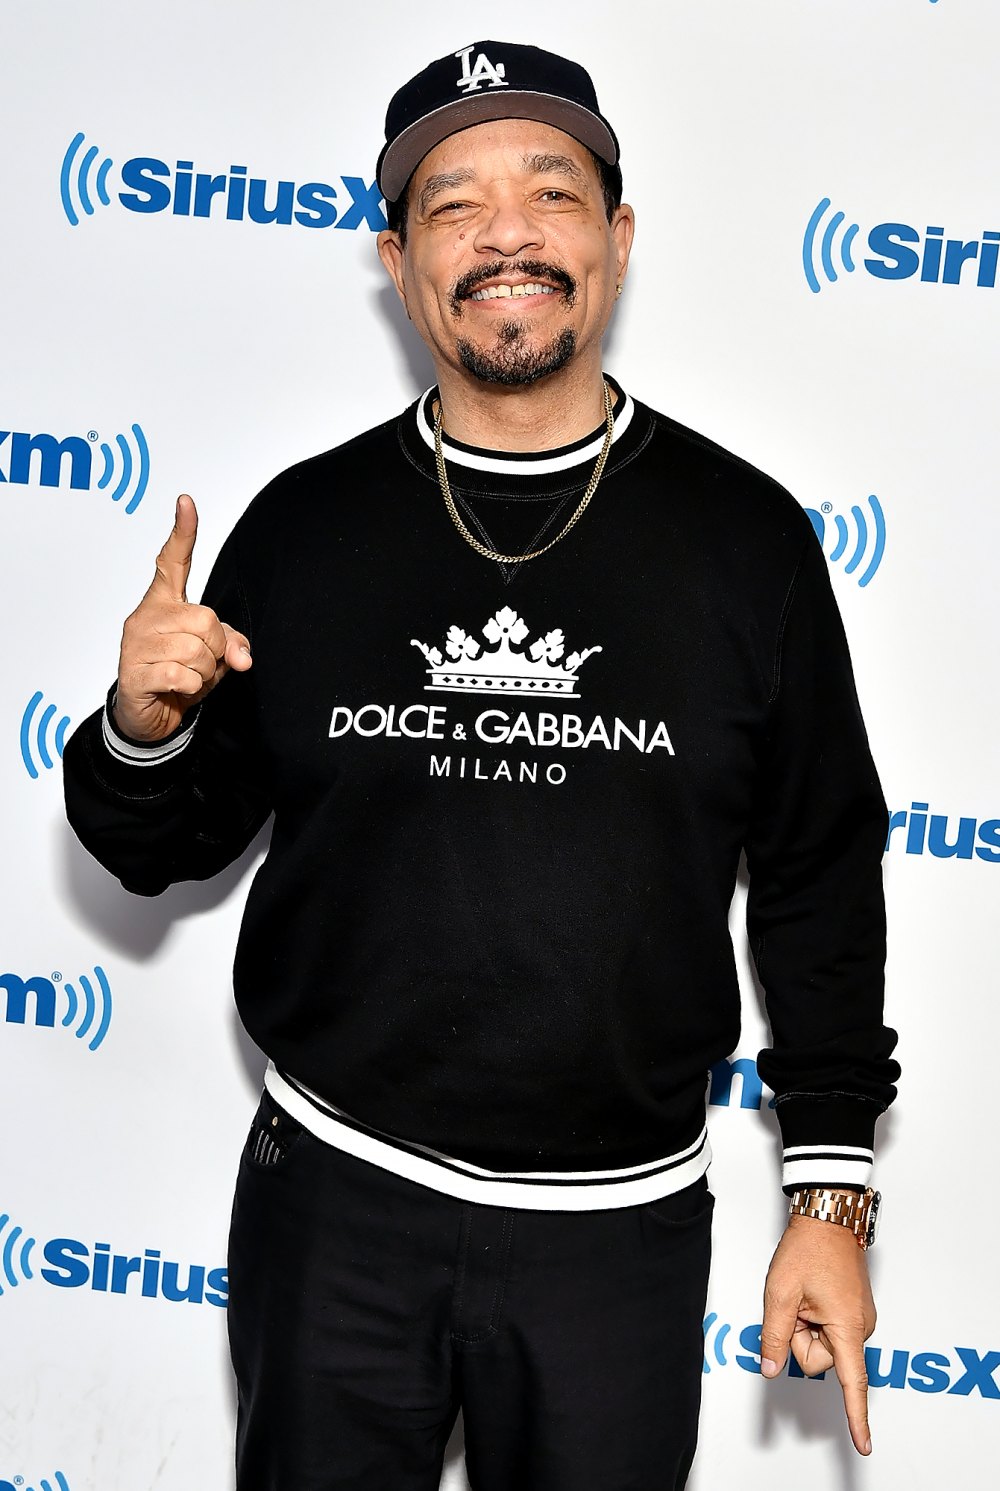 Ice-T is Down with Being Replaced With A.I.: ‘If You Can’t Beat Them, Join Them’